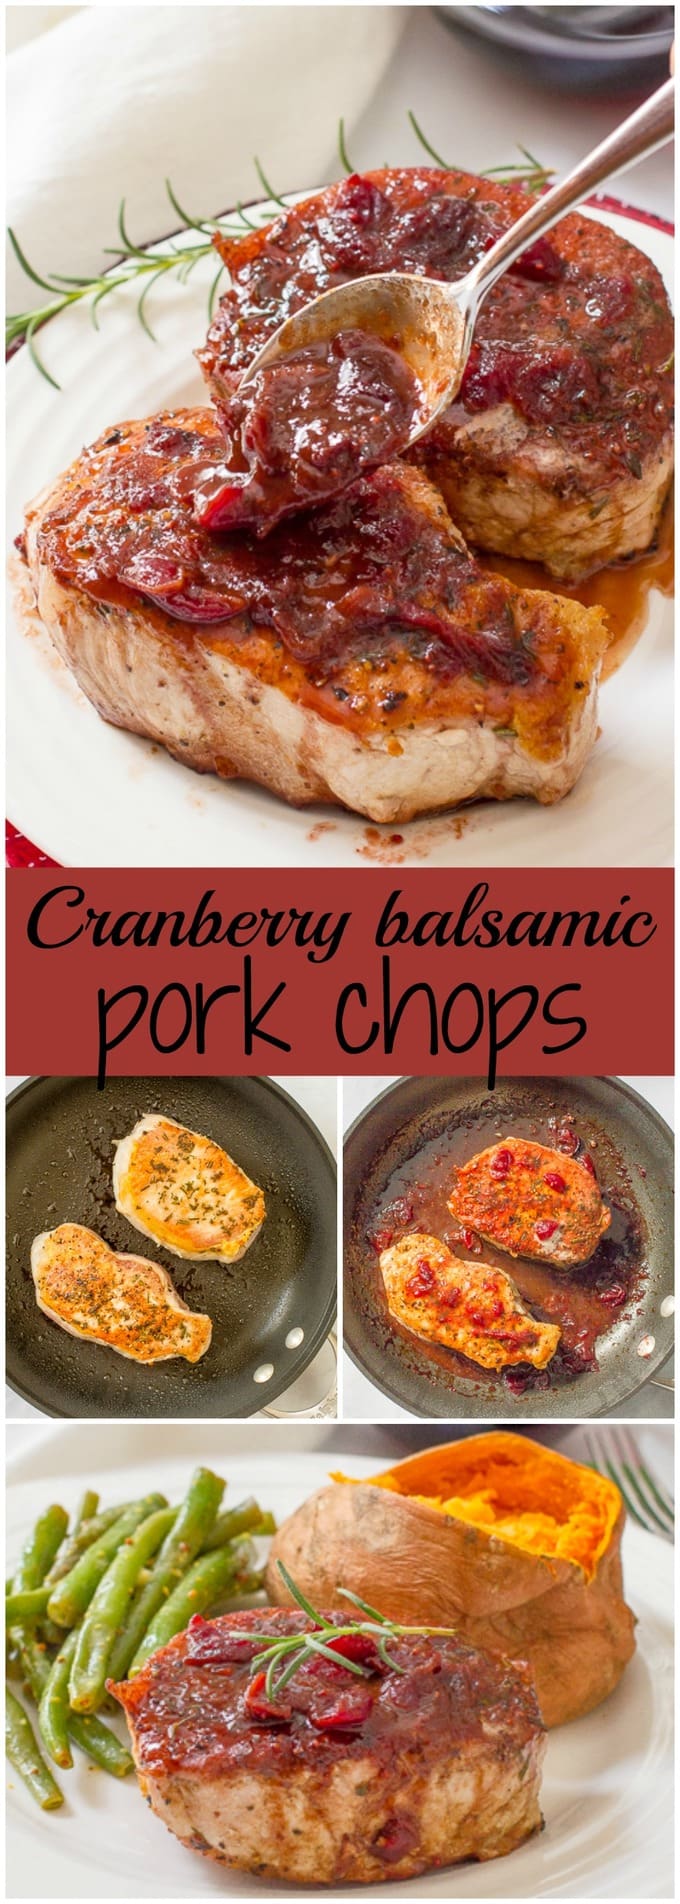 Cranberry balsamic pork chops are a quick and easy weeknight or date night dinner that has serious flavor with simple ingredients | www.familyfoodonthetable.com